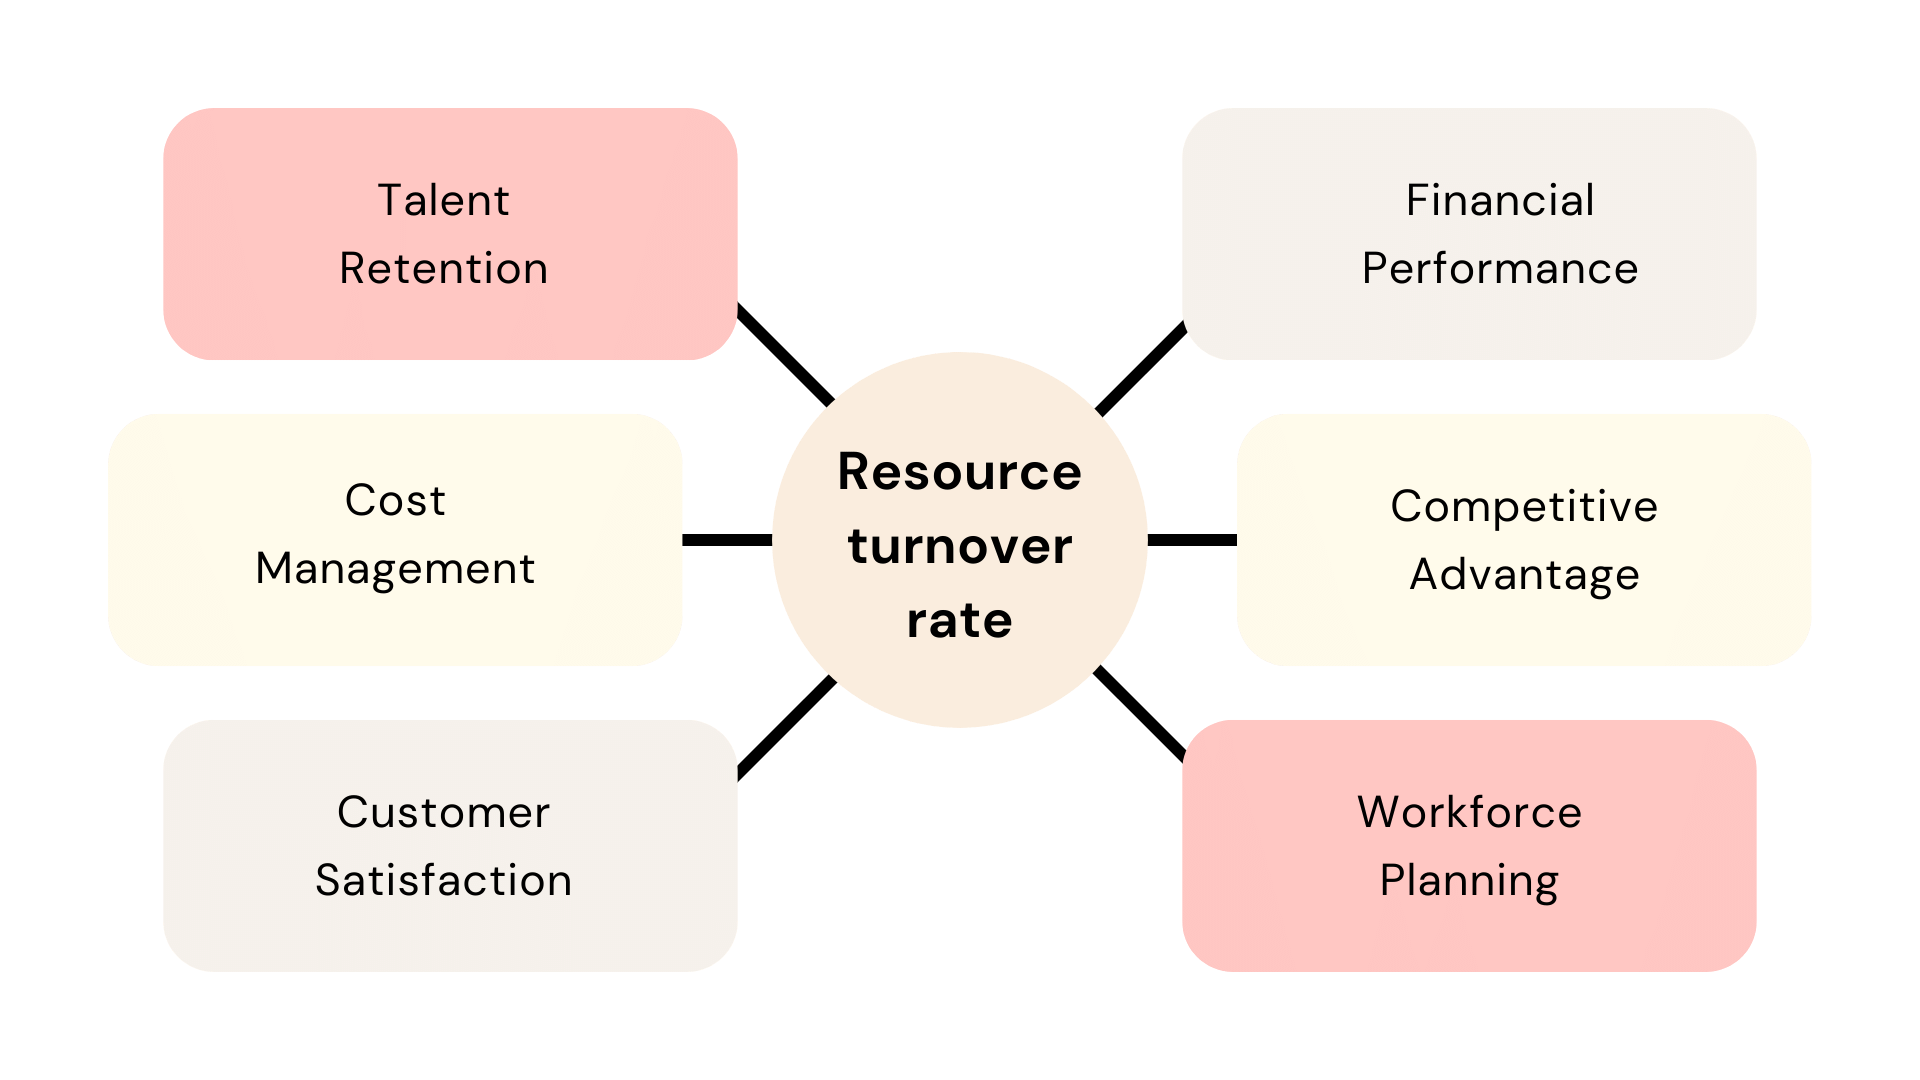 Resource turnover rate